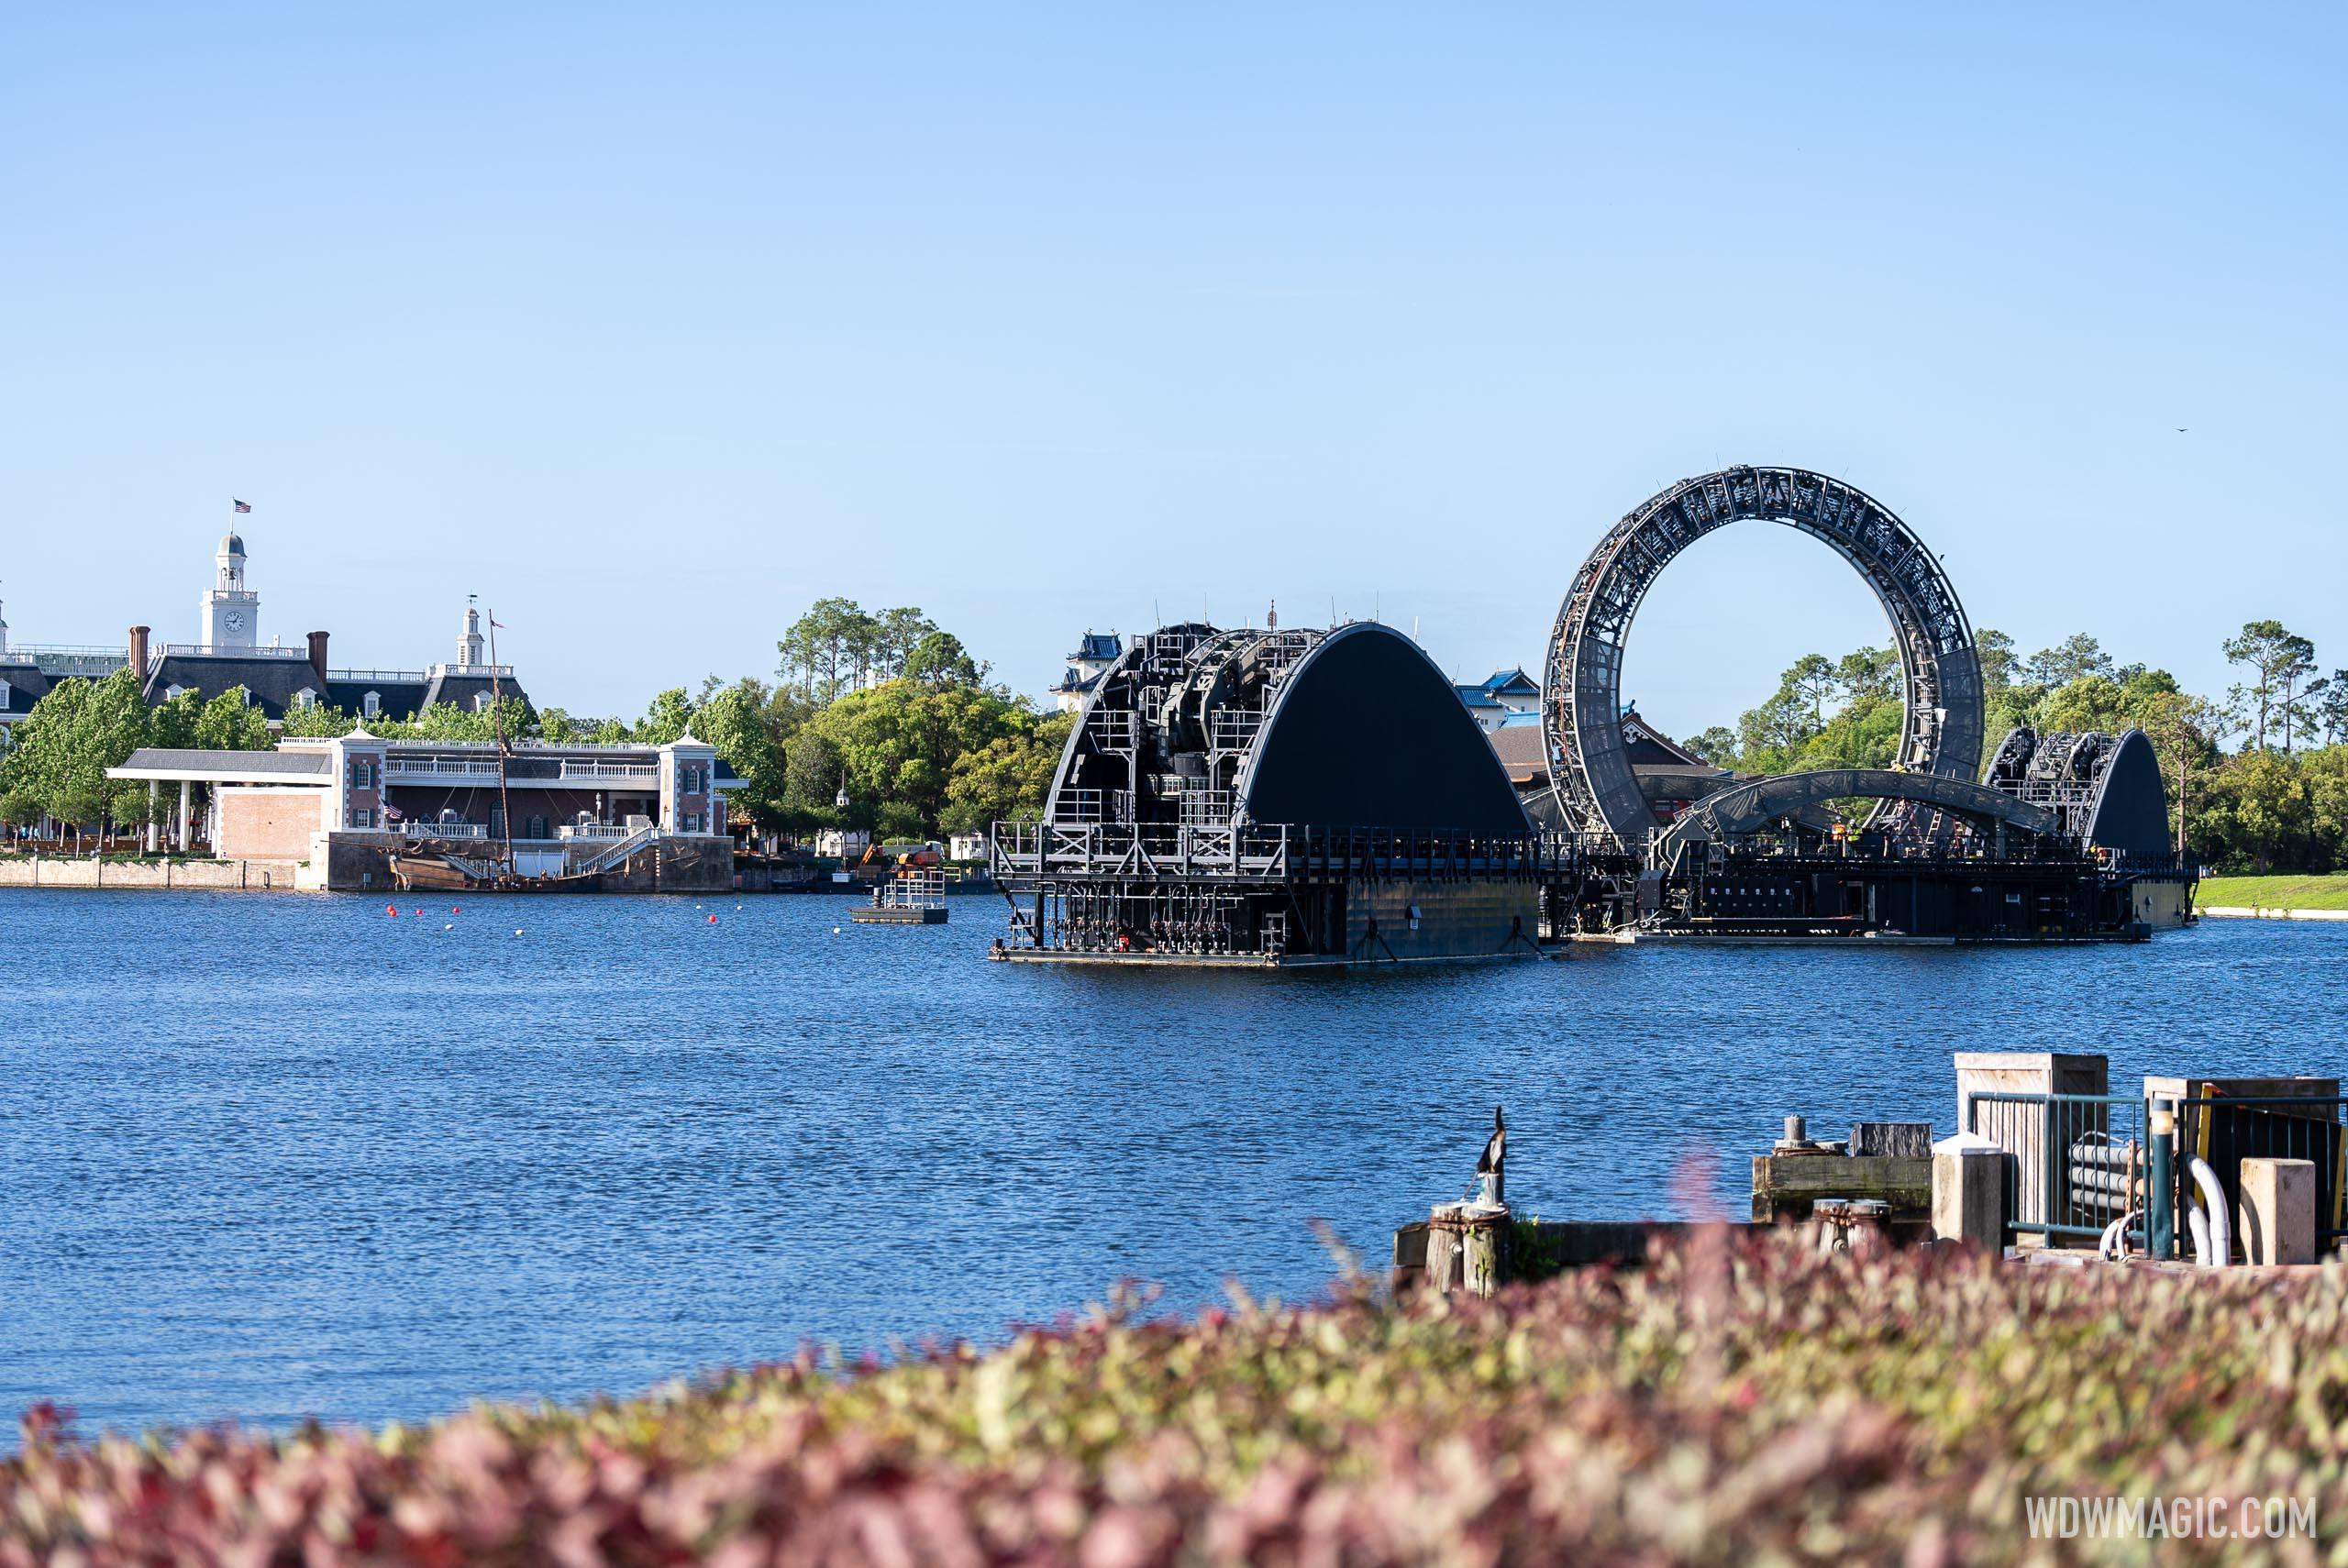 New aerial photo shows the first Harmonious barge being broken apart backstage at EPCOT